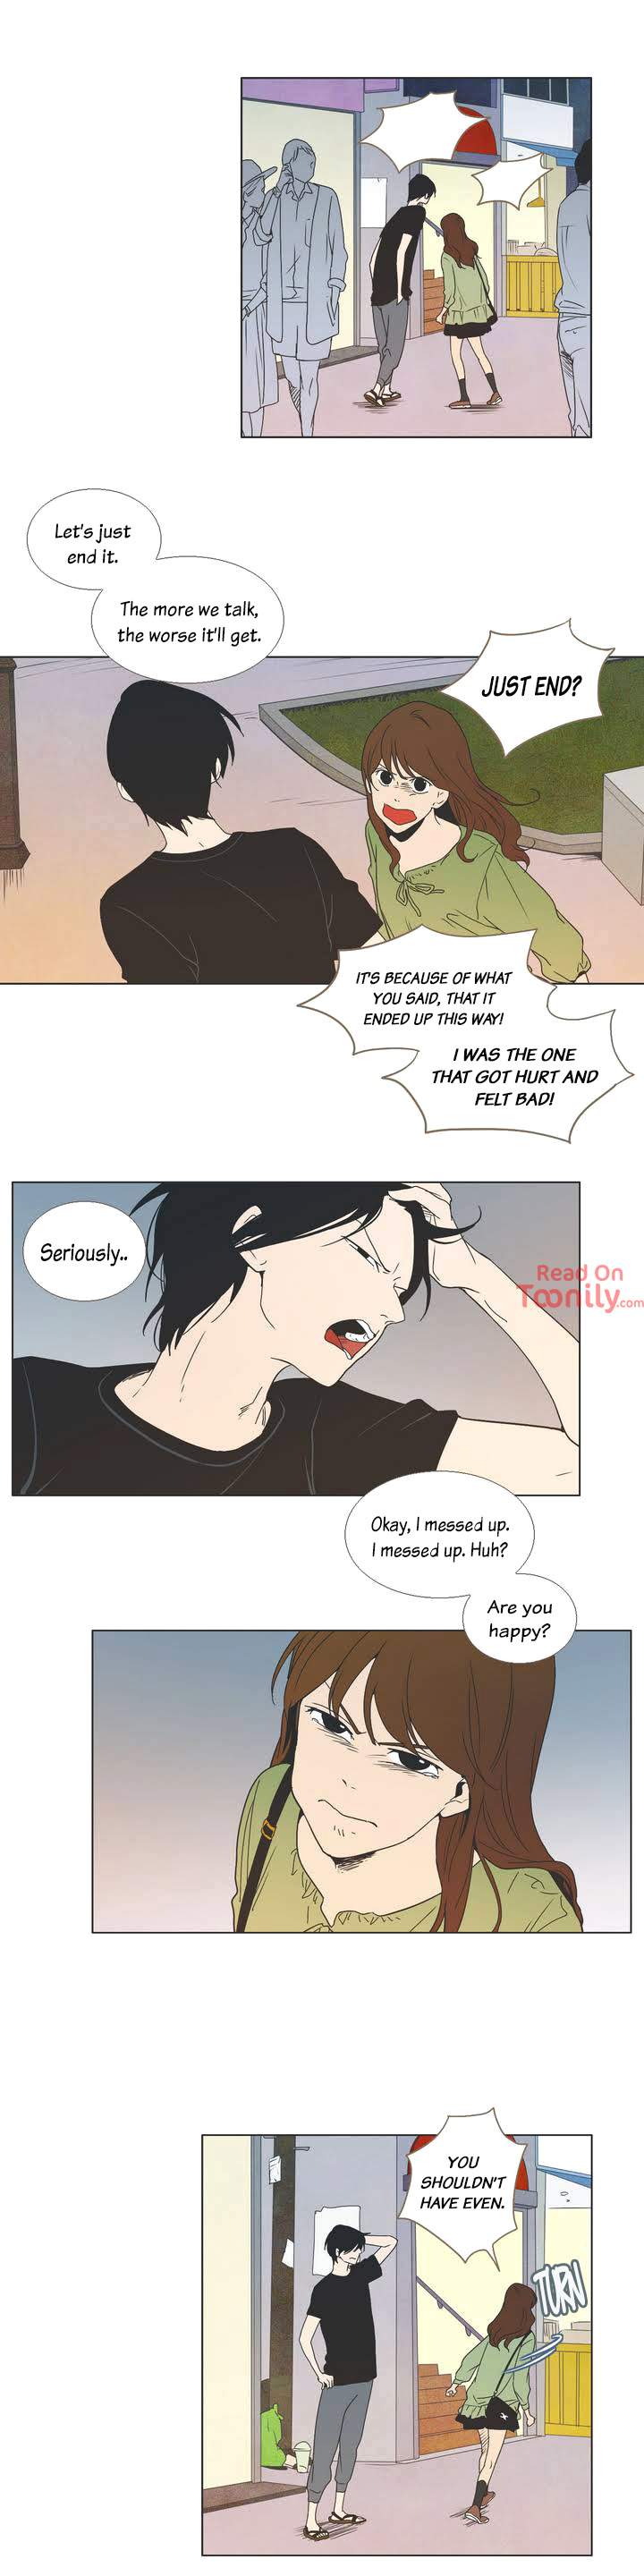 Something About Us - Chapter 11 Page 12